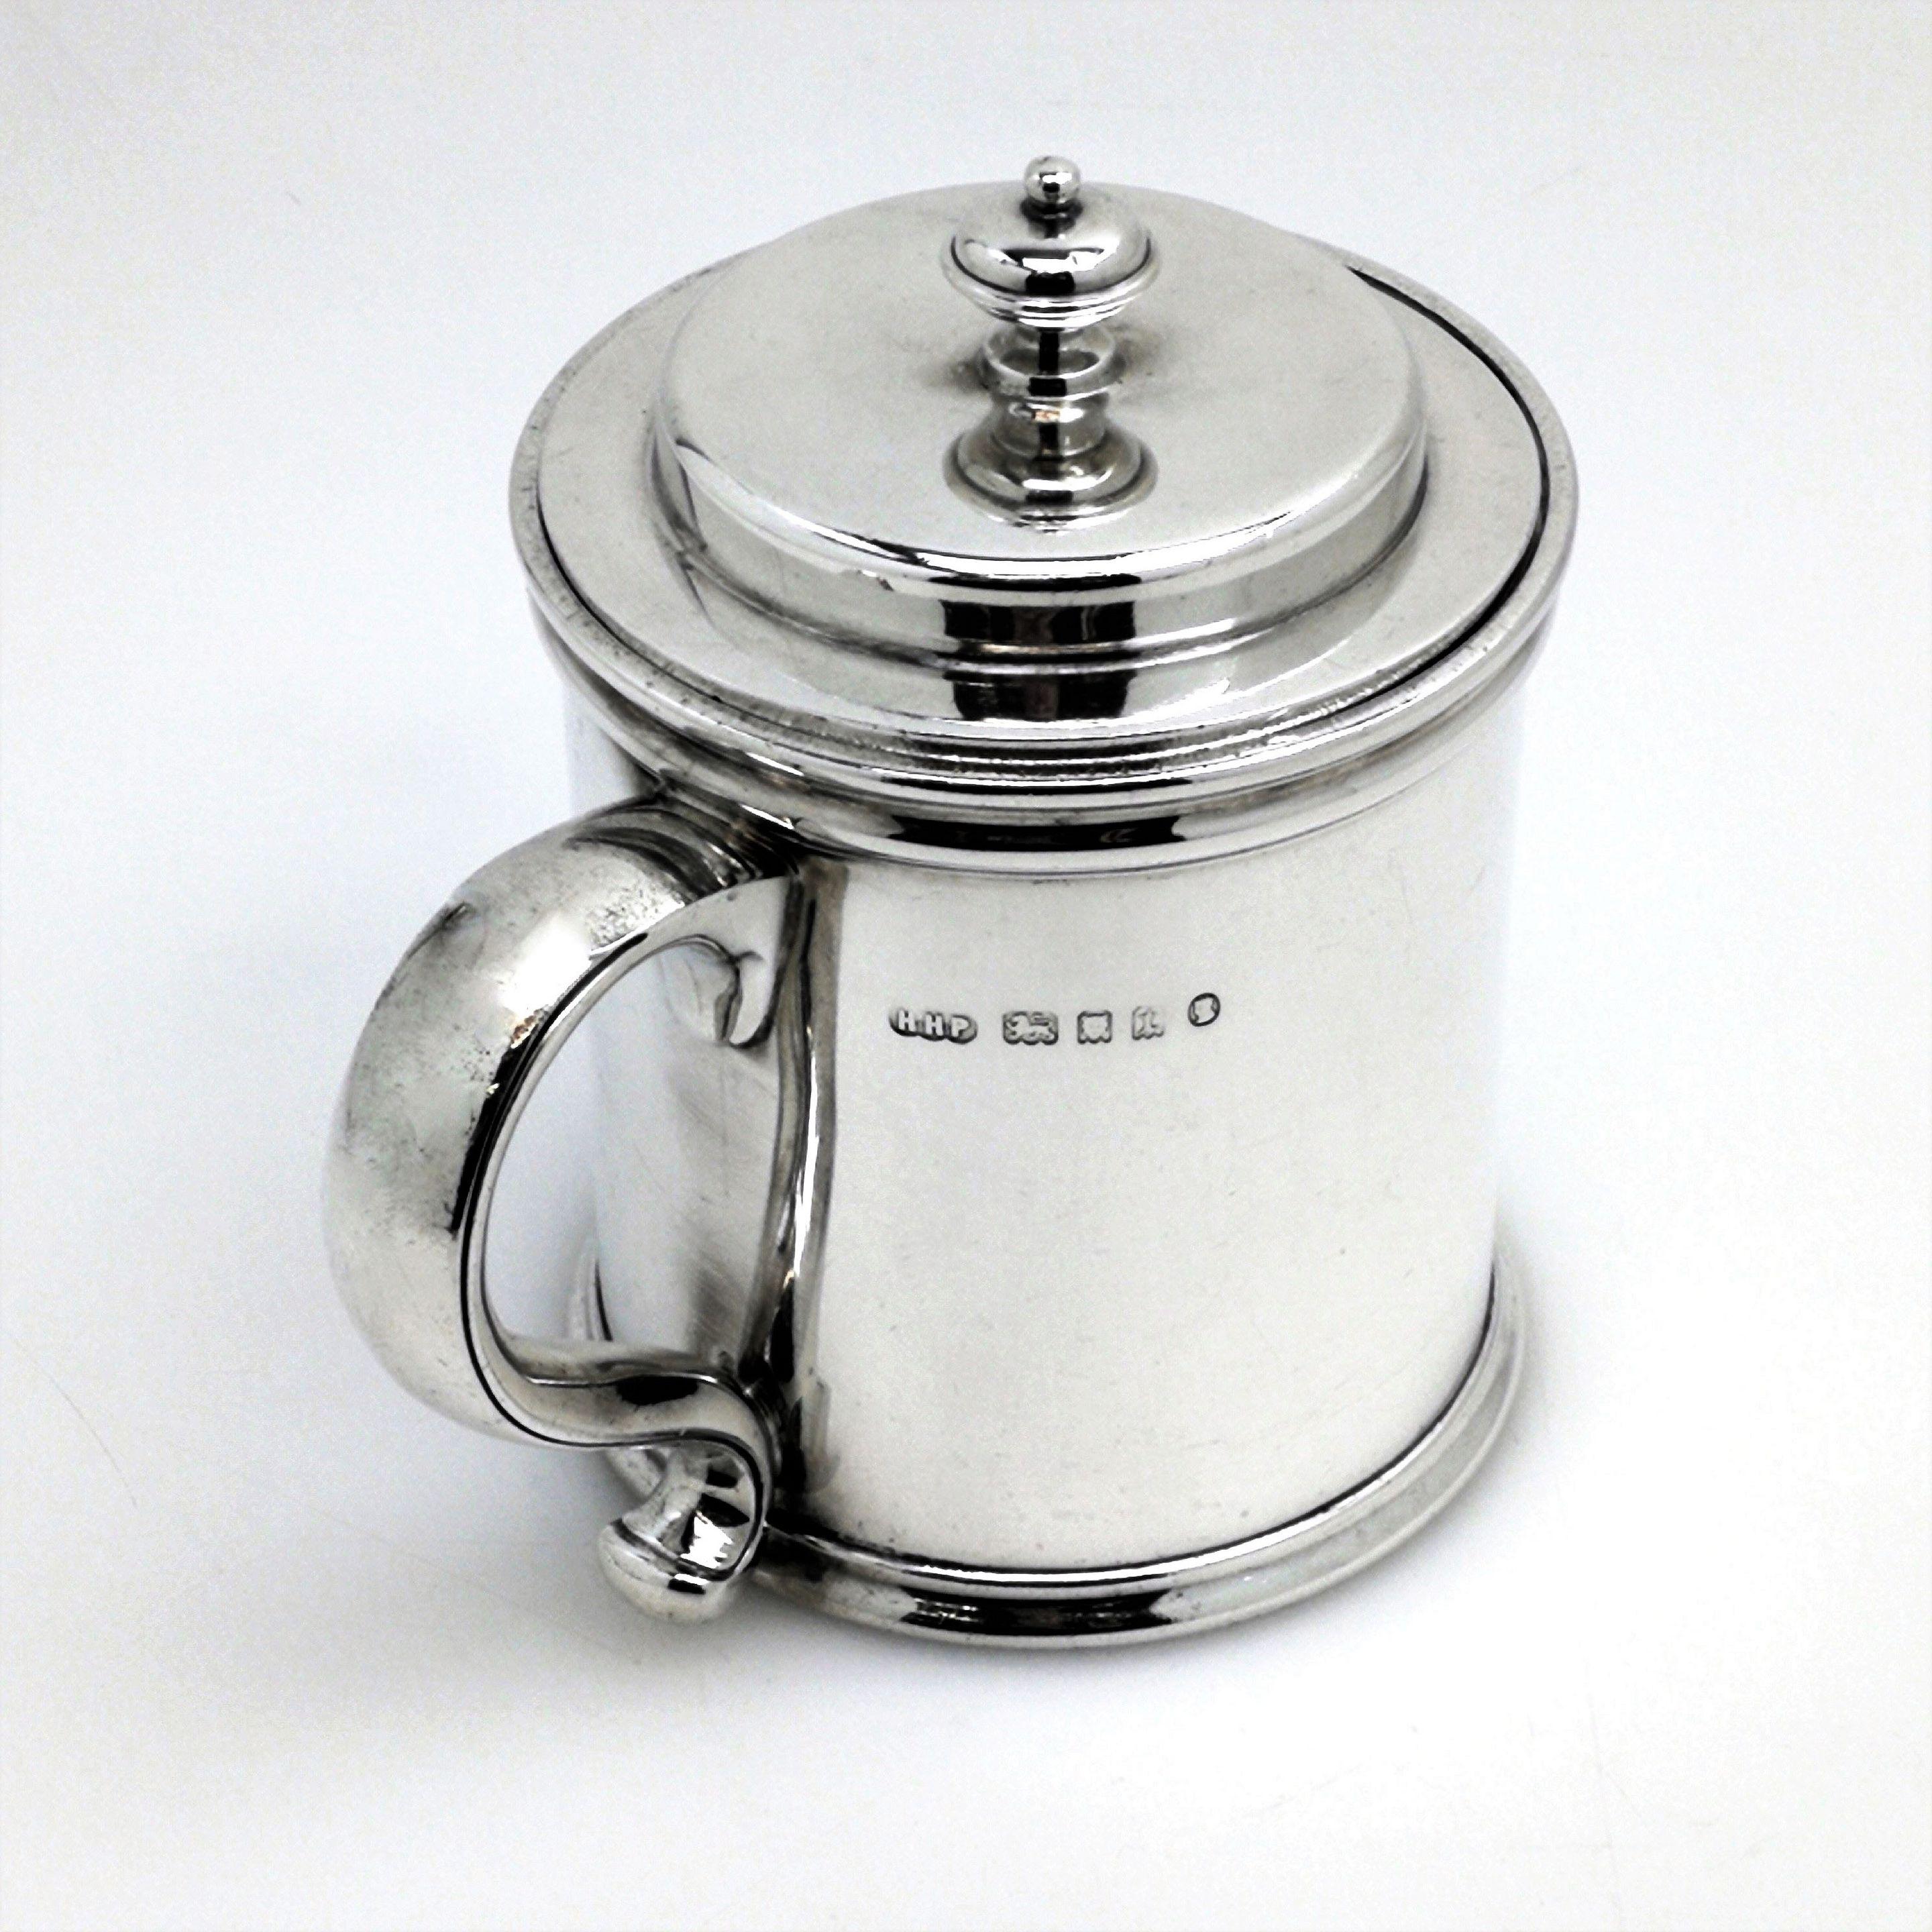 An Impressive antique solid silver preserve jar with a fitted lid and a dark blue removable glass liner. The jar has a classic straight sided design with a scroll handle, and features a small engraved crest opposite the handle.
 
 Made in London